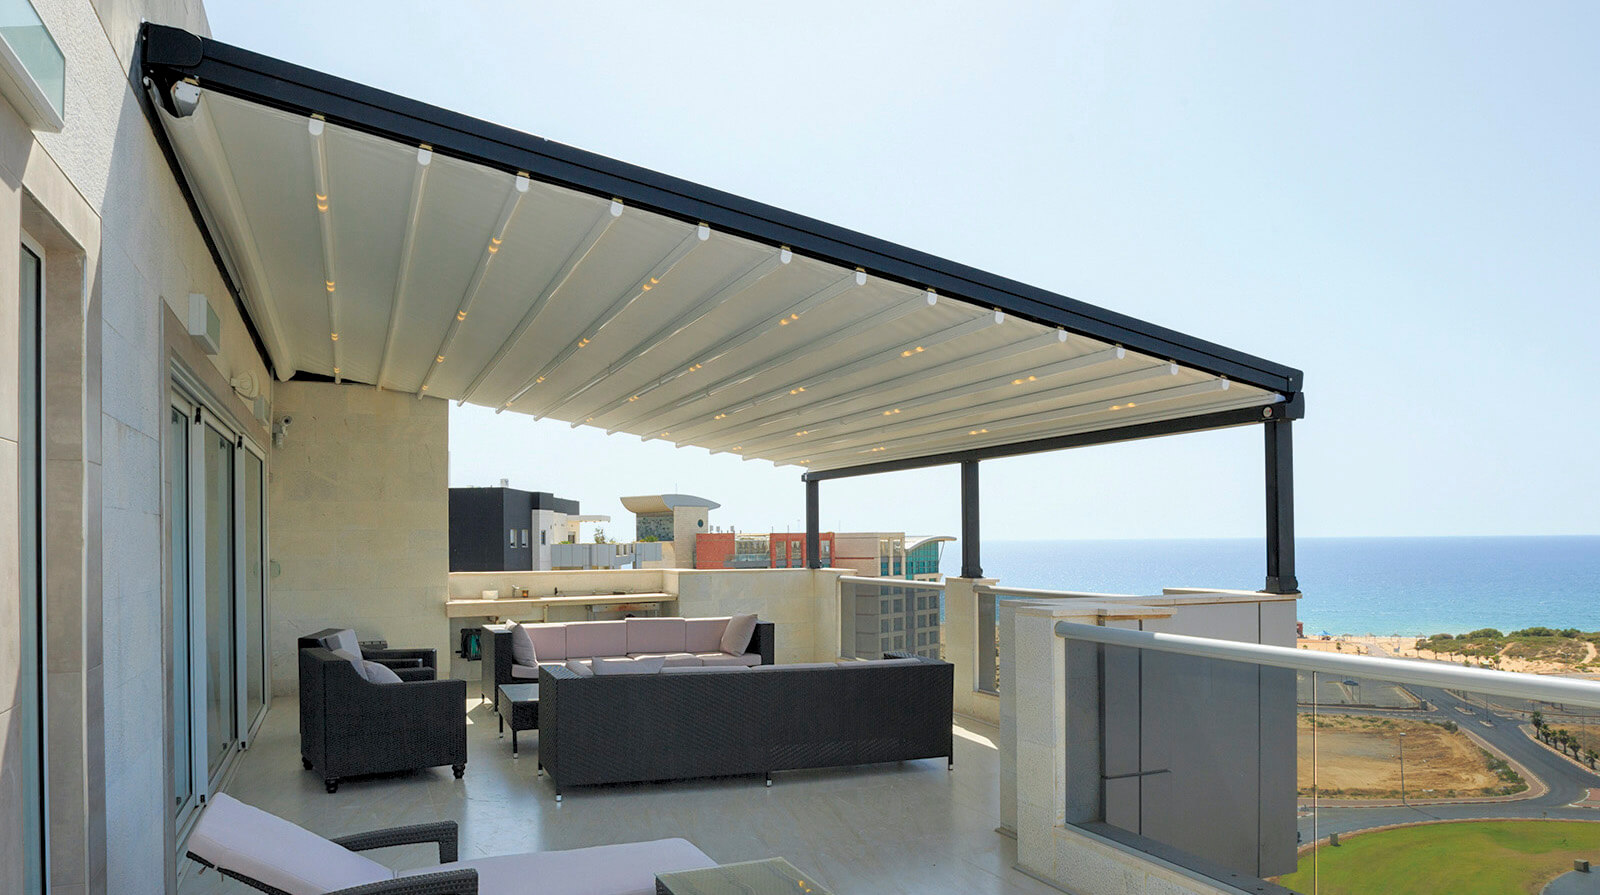 Canberra Blinds Centre | Retractrable Roof Systems